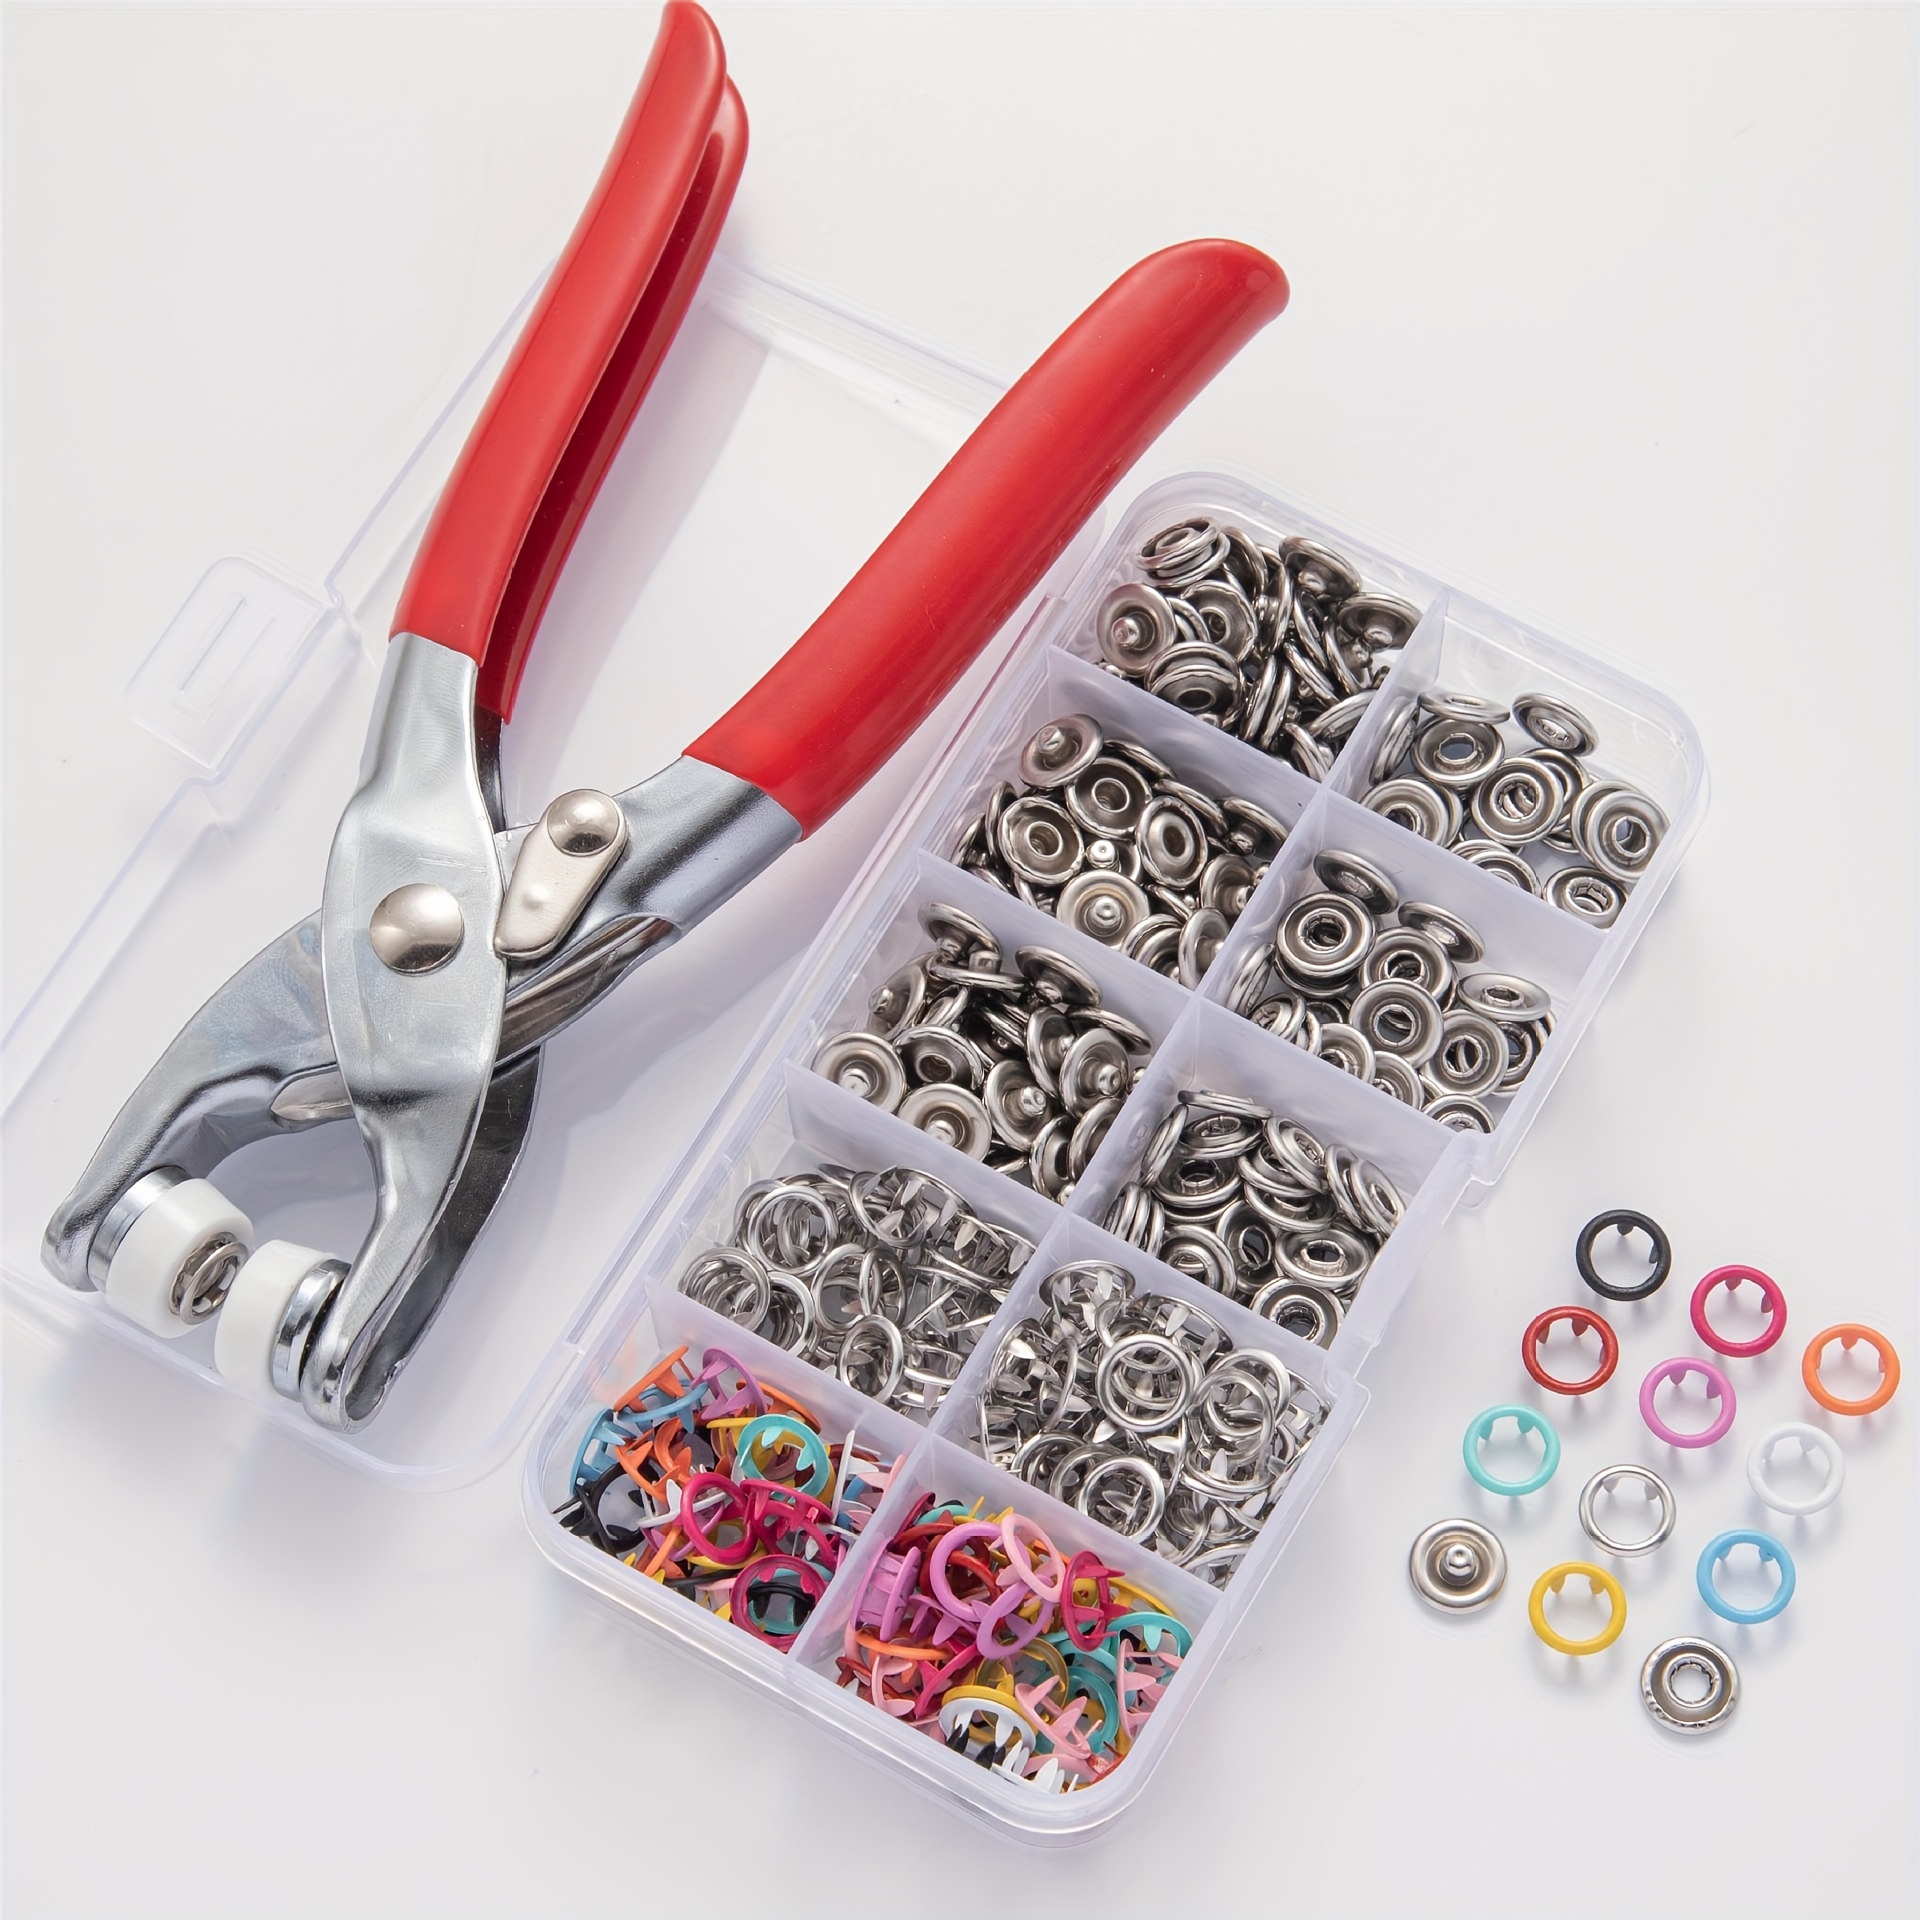 

Complete Five-claw Buckle Set With Hand Pressure Pliers - 50/100pc Easy Attachment Tool Kit For Clothing And Bags